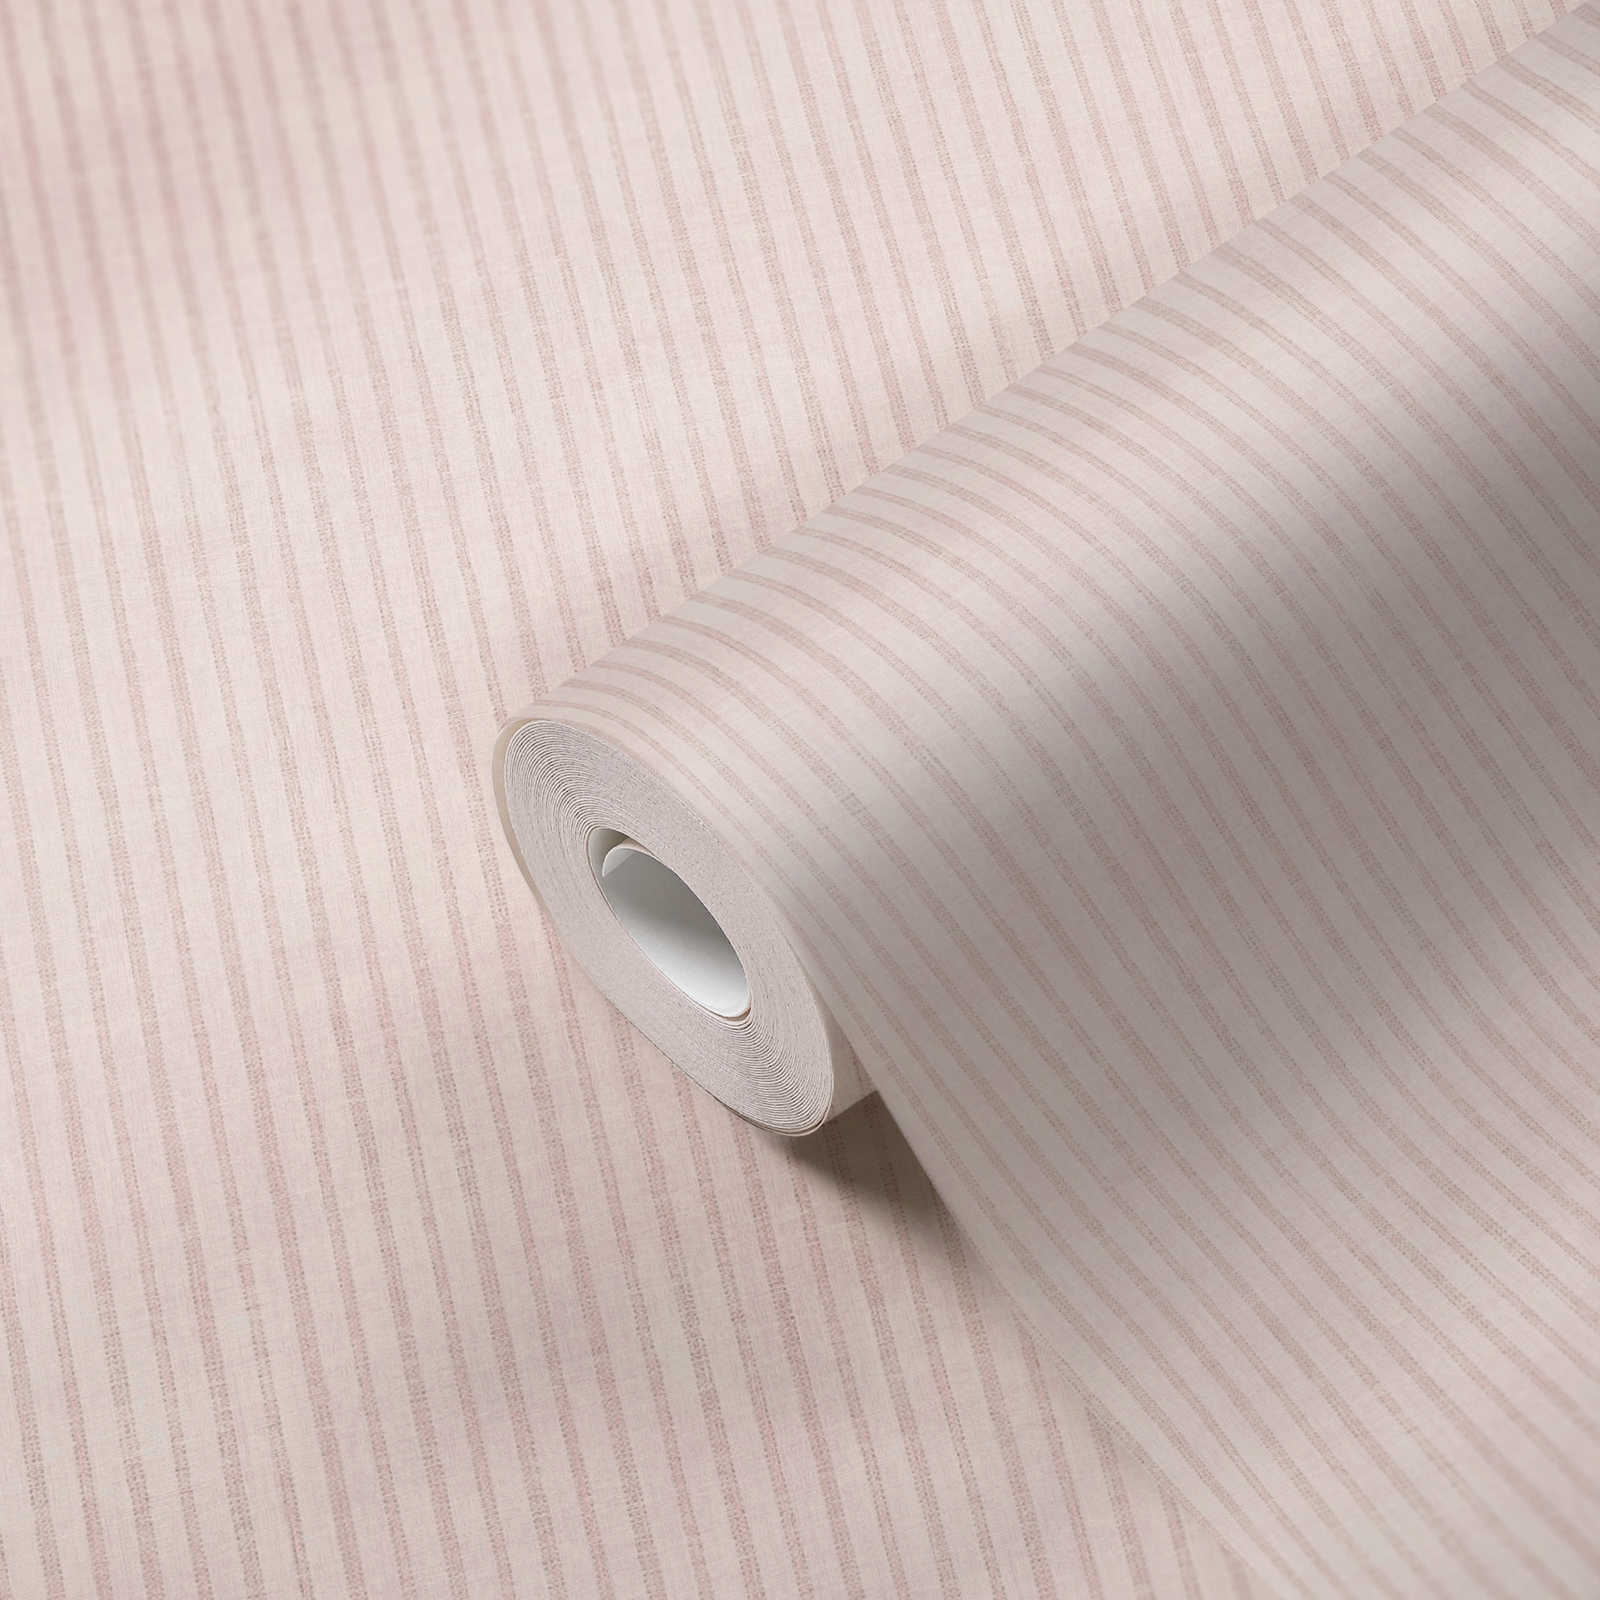             Country style striped wallpaper - cream, pink
        